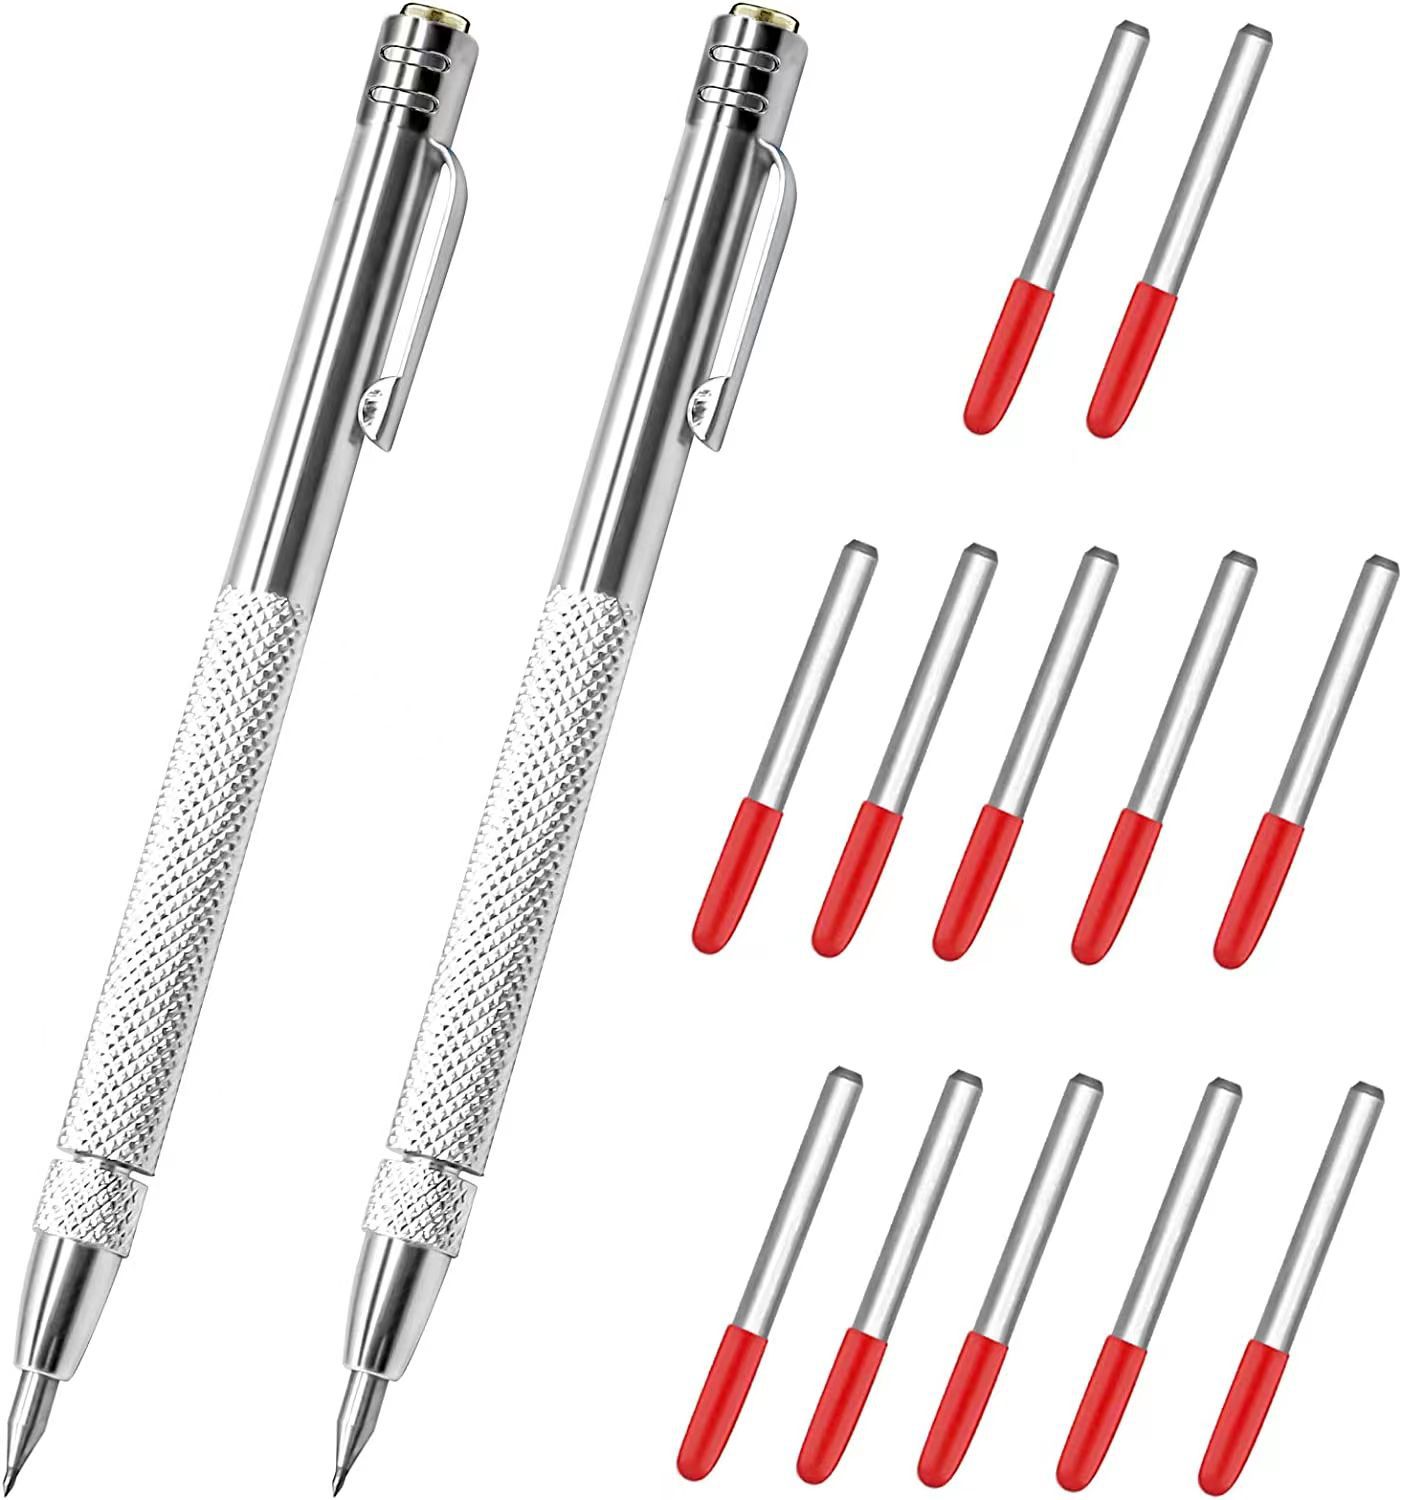 Laboratory engraving tool and micro engraving pen for permanent marking,  referencing and identification